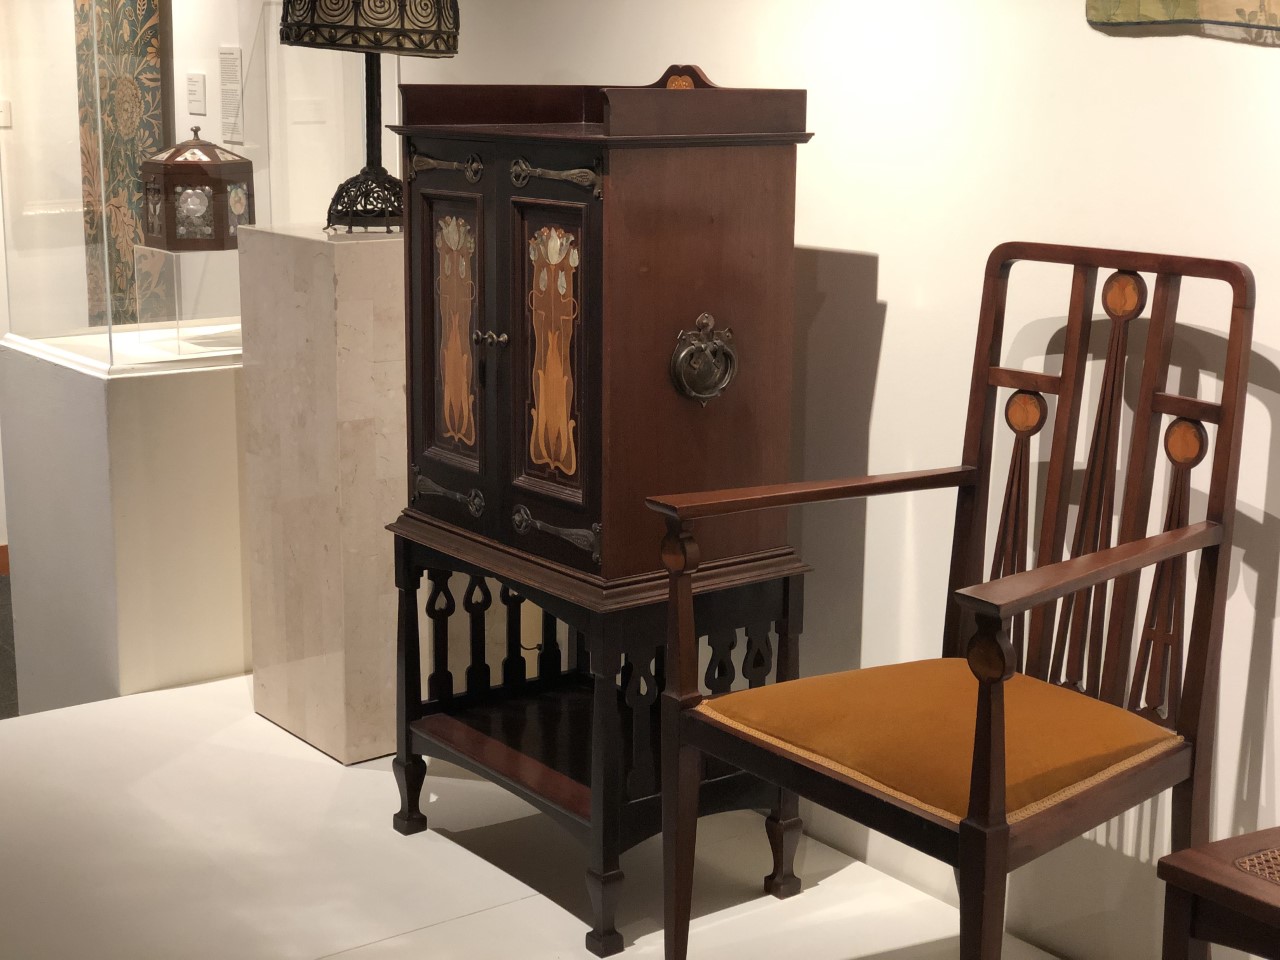 Virtual Lecture: Collecting 1900 Modern with Lawrence Kreisman